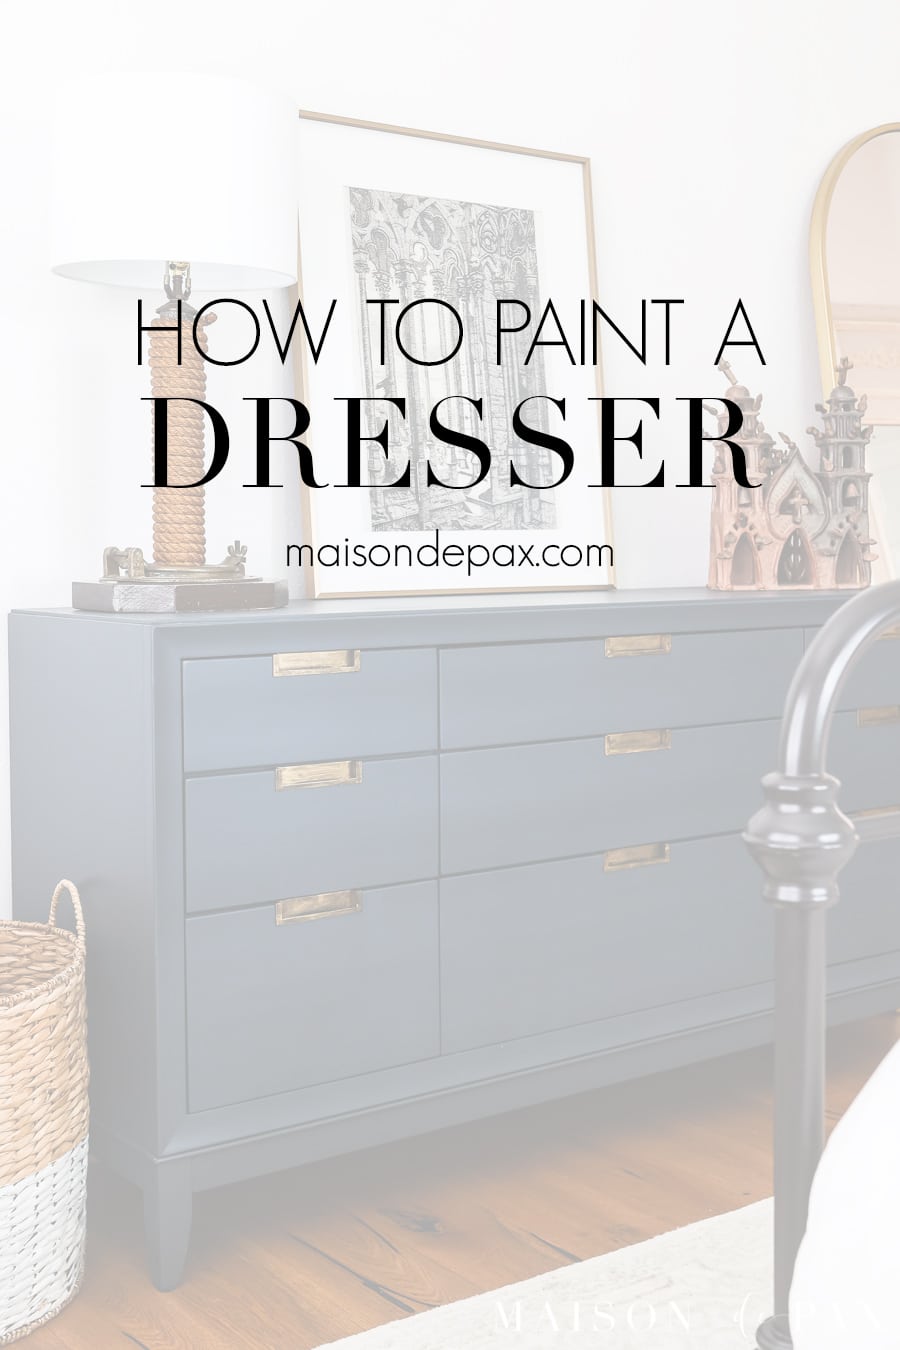 how to paint a dresser